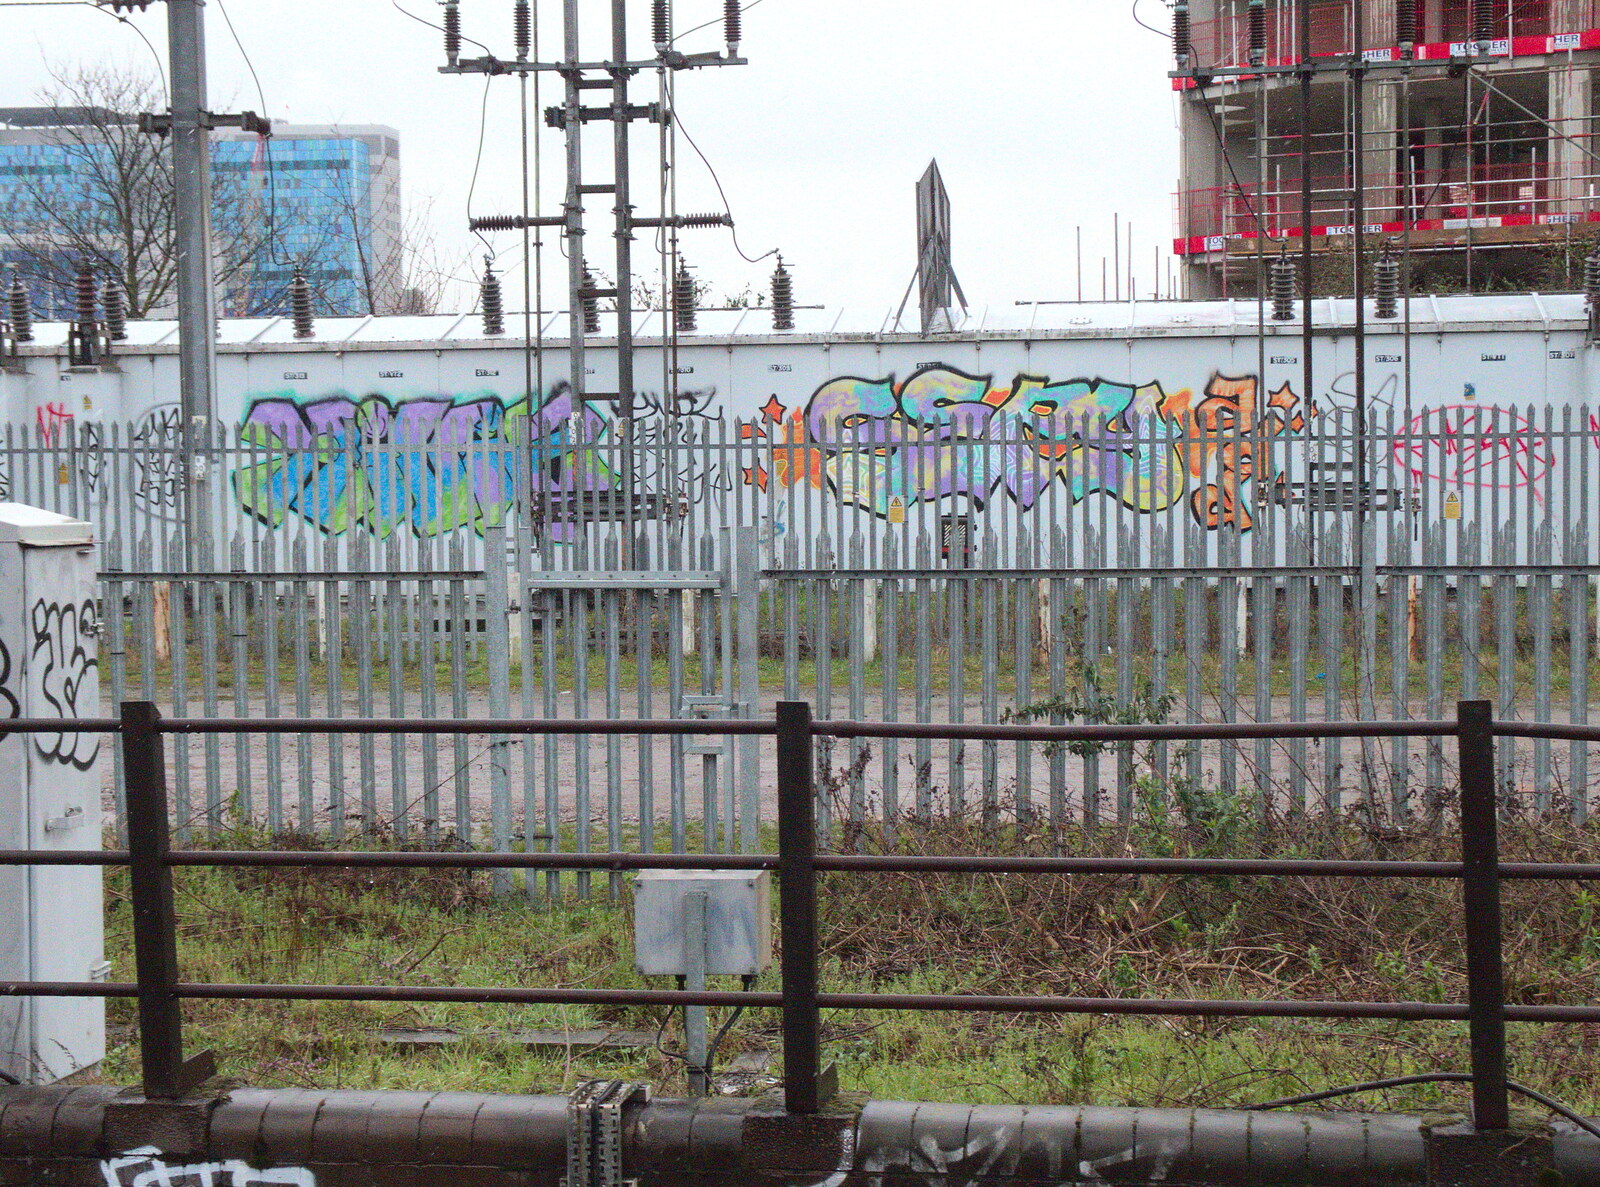 Colourful tags on an electrical substation from Trackside Graffiti, and Harry's Cake, London and Suffolk - 28th March 2018